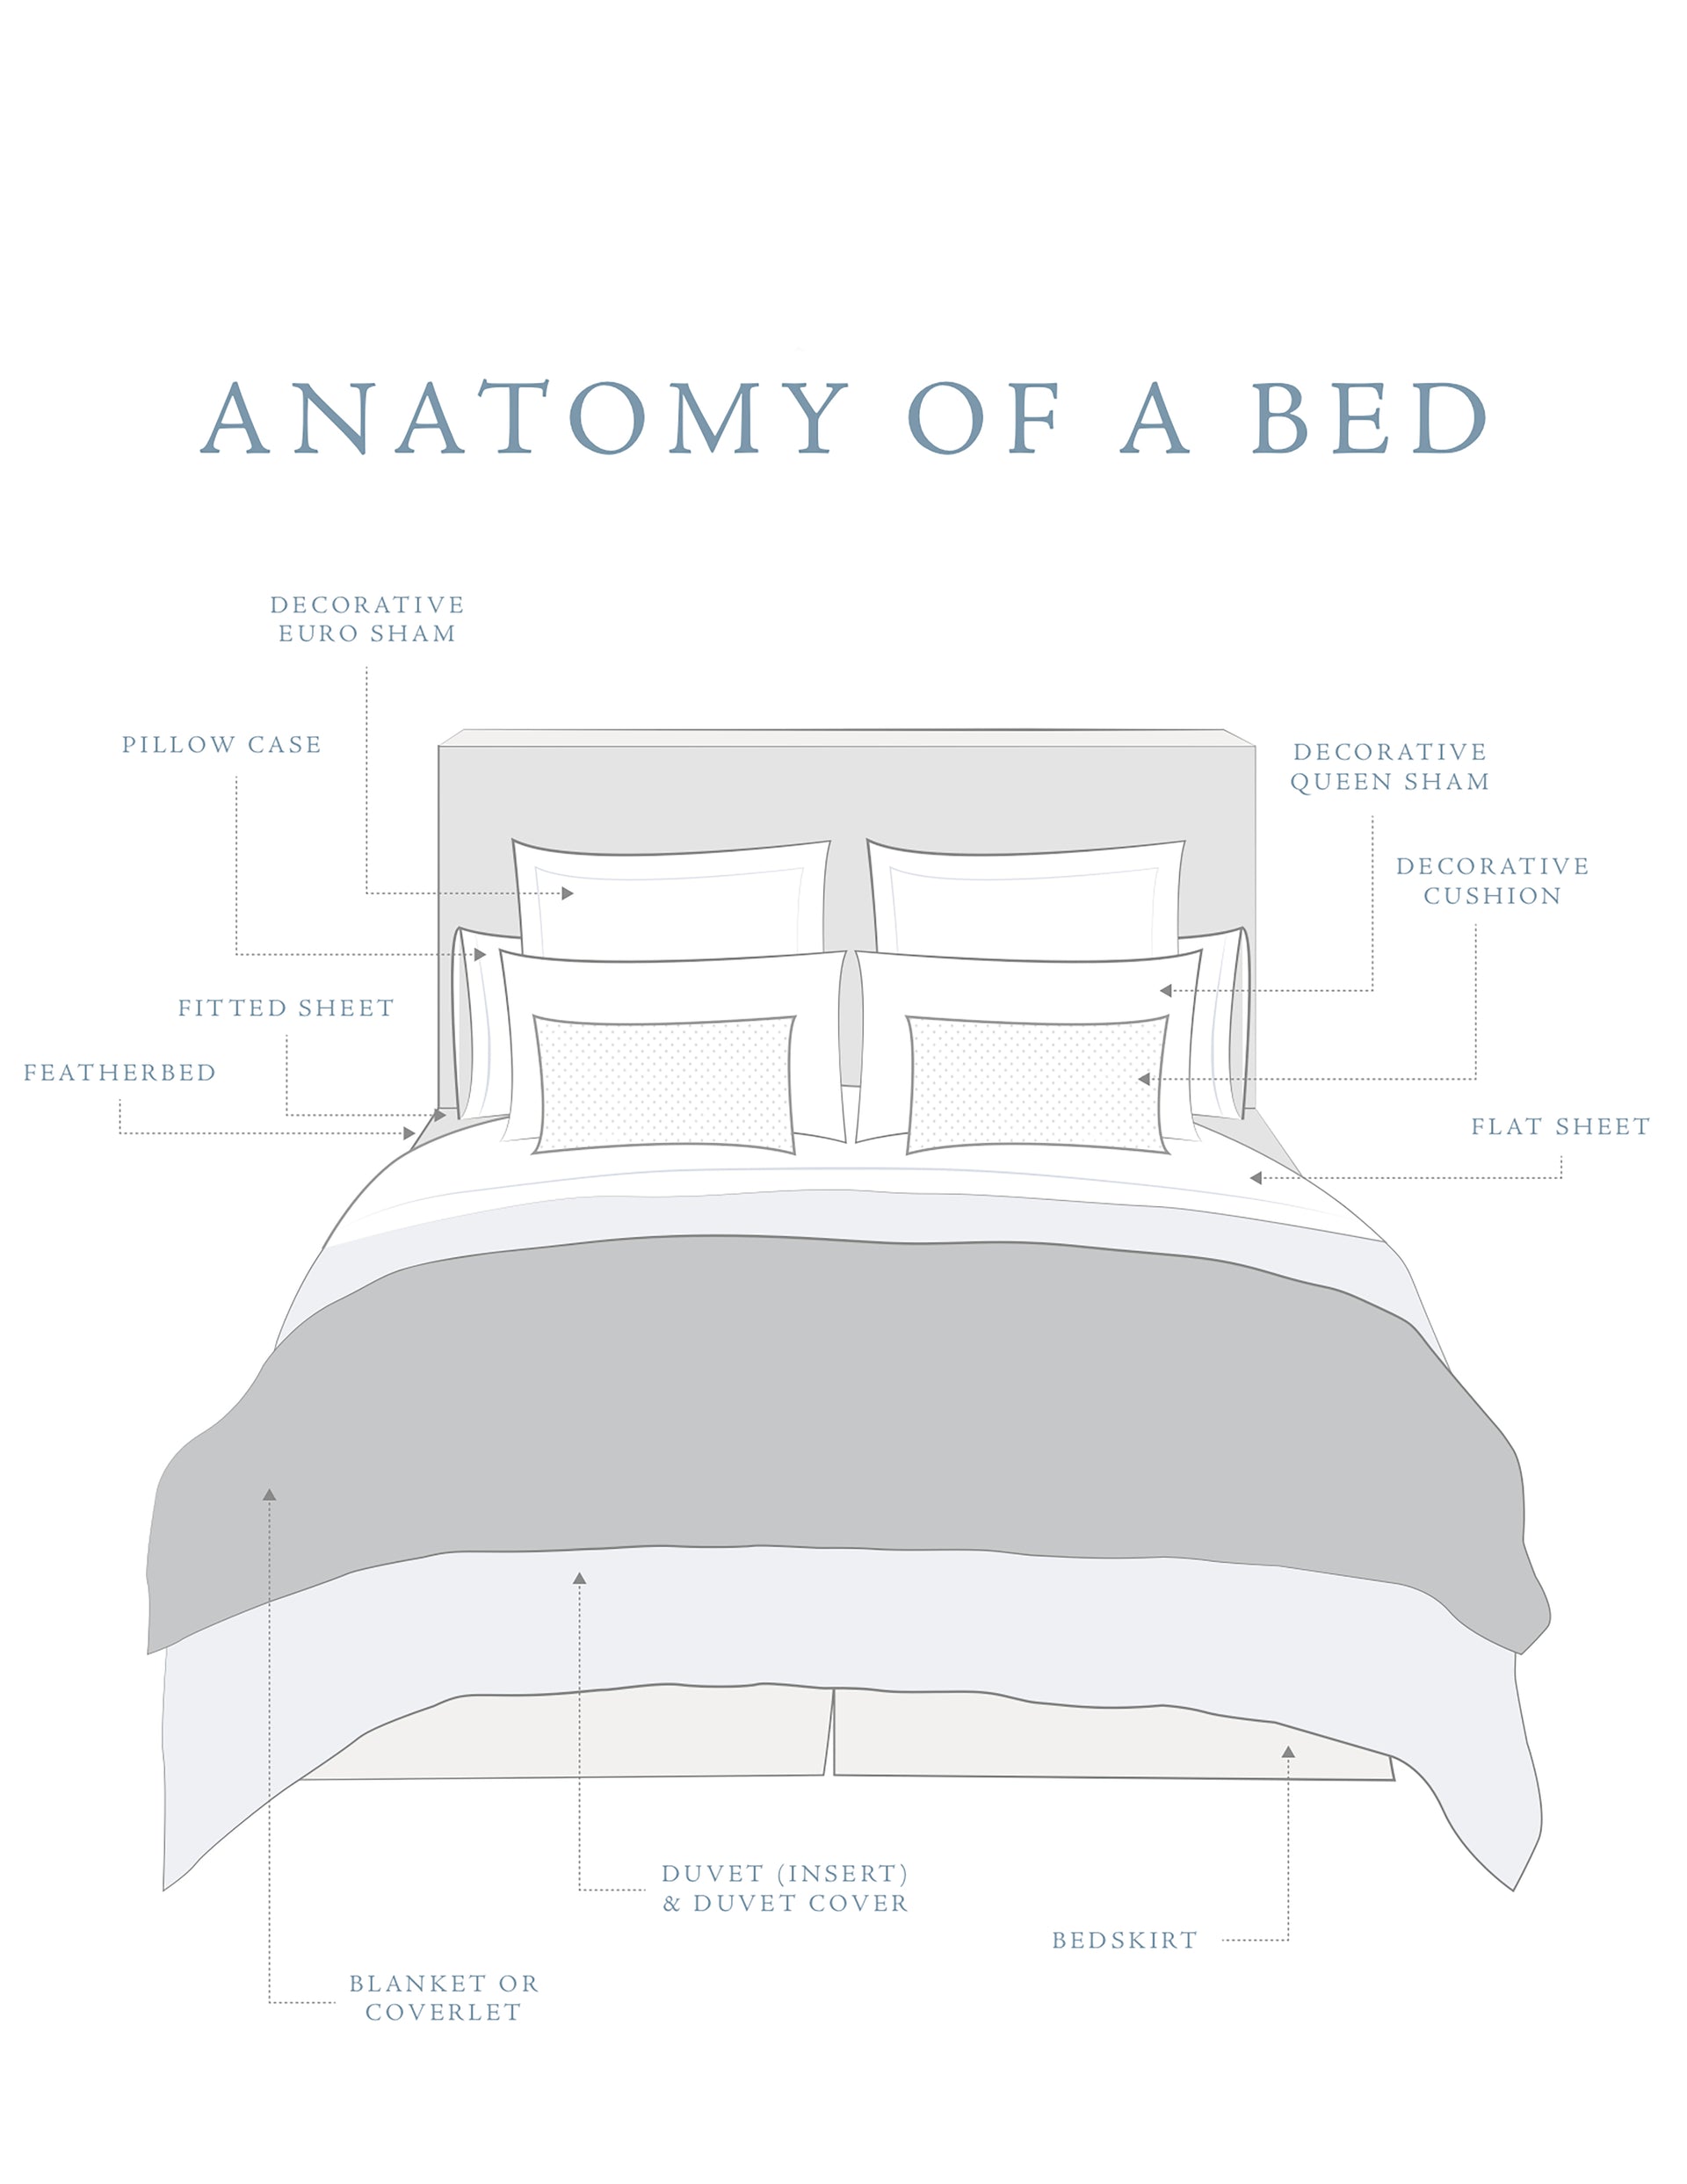 Anatomy of a Bed